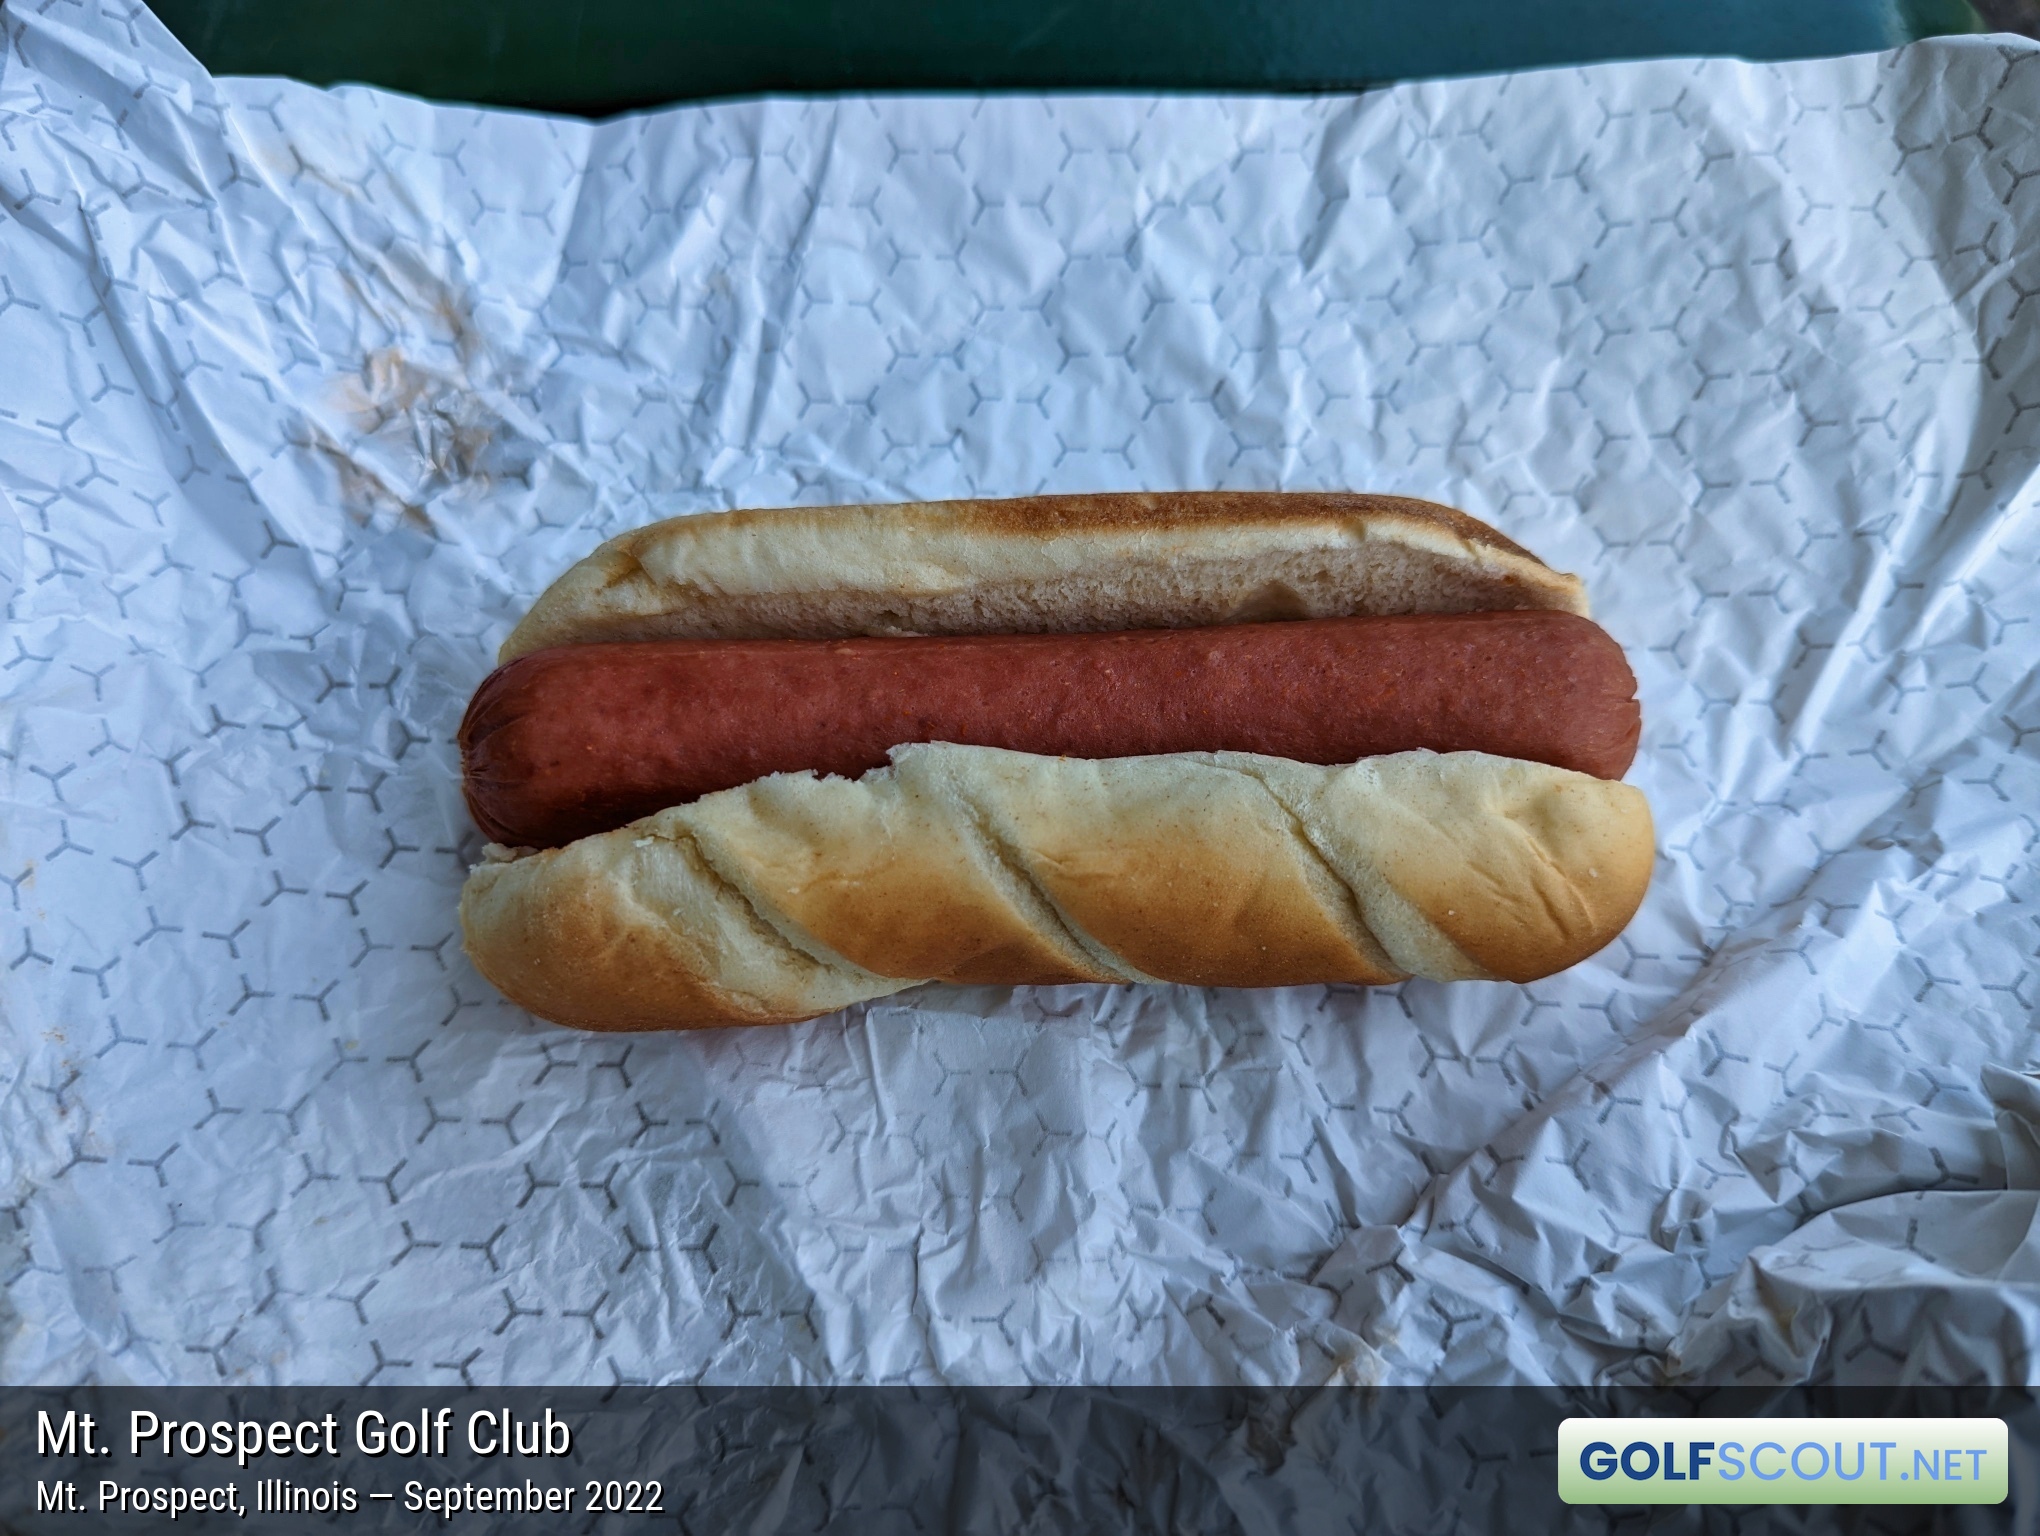 Photo of the food and dining at Mt. Prospect Golf Club in Mt. Prospect, Illinois. Photo of the hot dog at Mt. Prospect Golf Club in Mt. Prospect, Illinois.